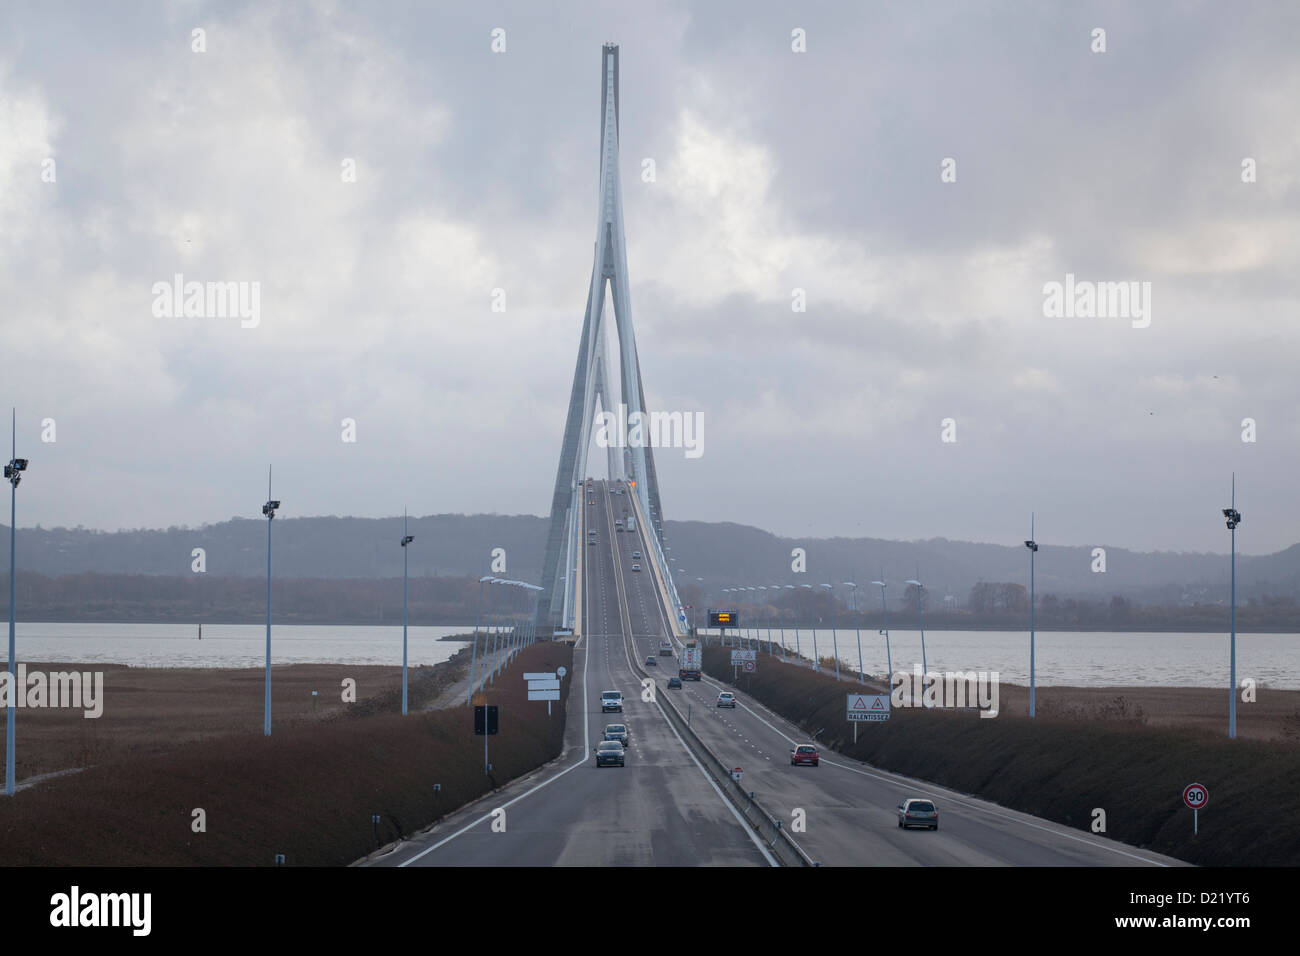 The Pont de du Normandie is a cable-stayed road bridge that spans the mouth of the river Seine A29 Stock Photo